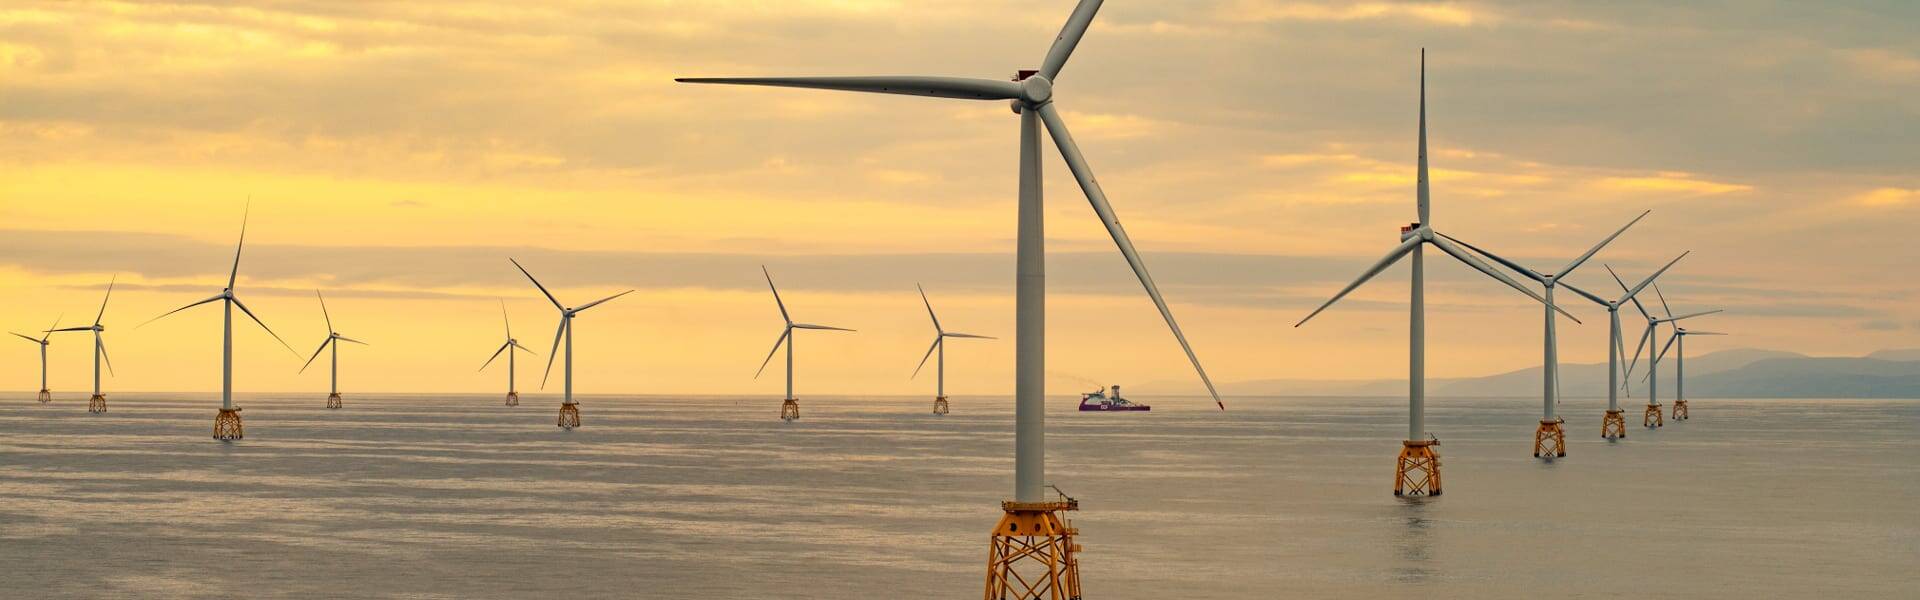 Energy projects awarded shares of £1.3bn recovery package